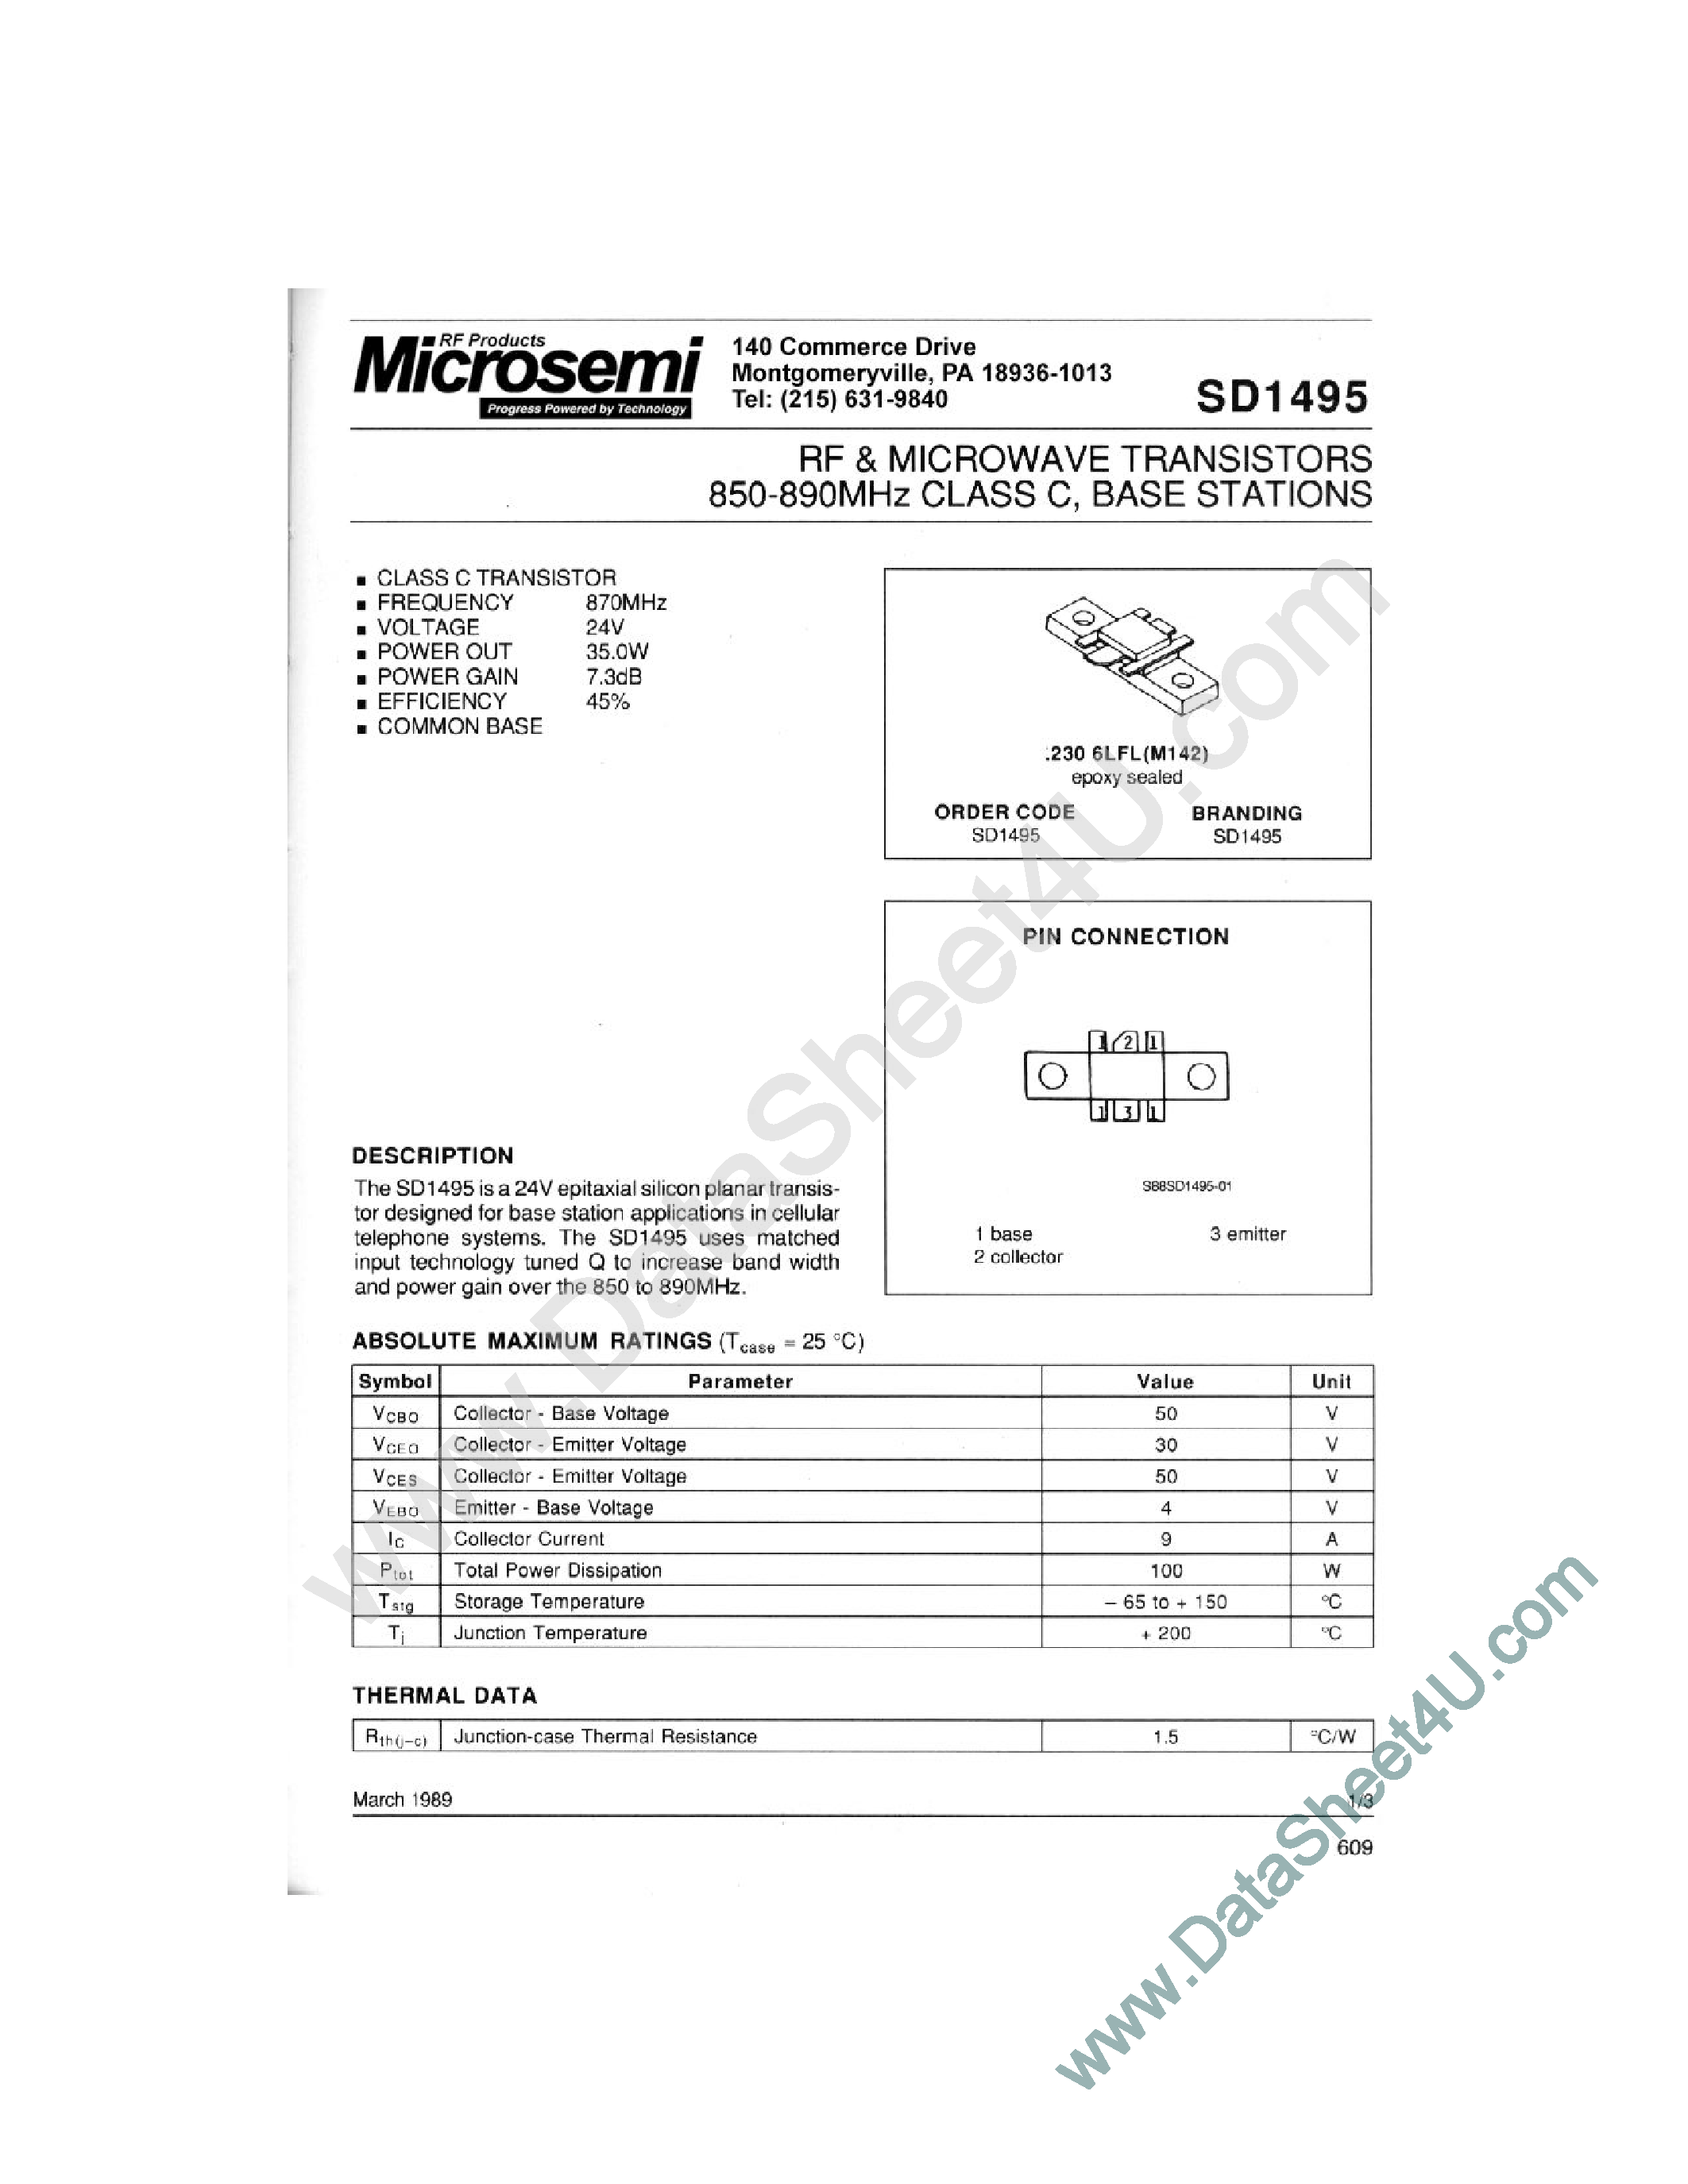 Datasheet SD1495 - RF & MICROWAVE TRANSISTORS 850-890 MHz CLASS C BASE STATIONS page 1